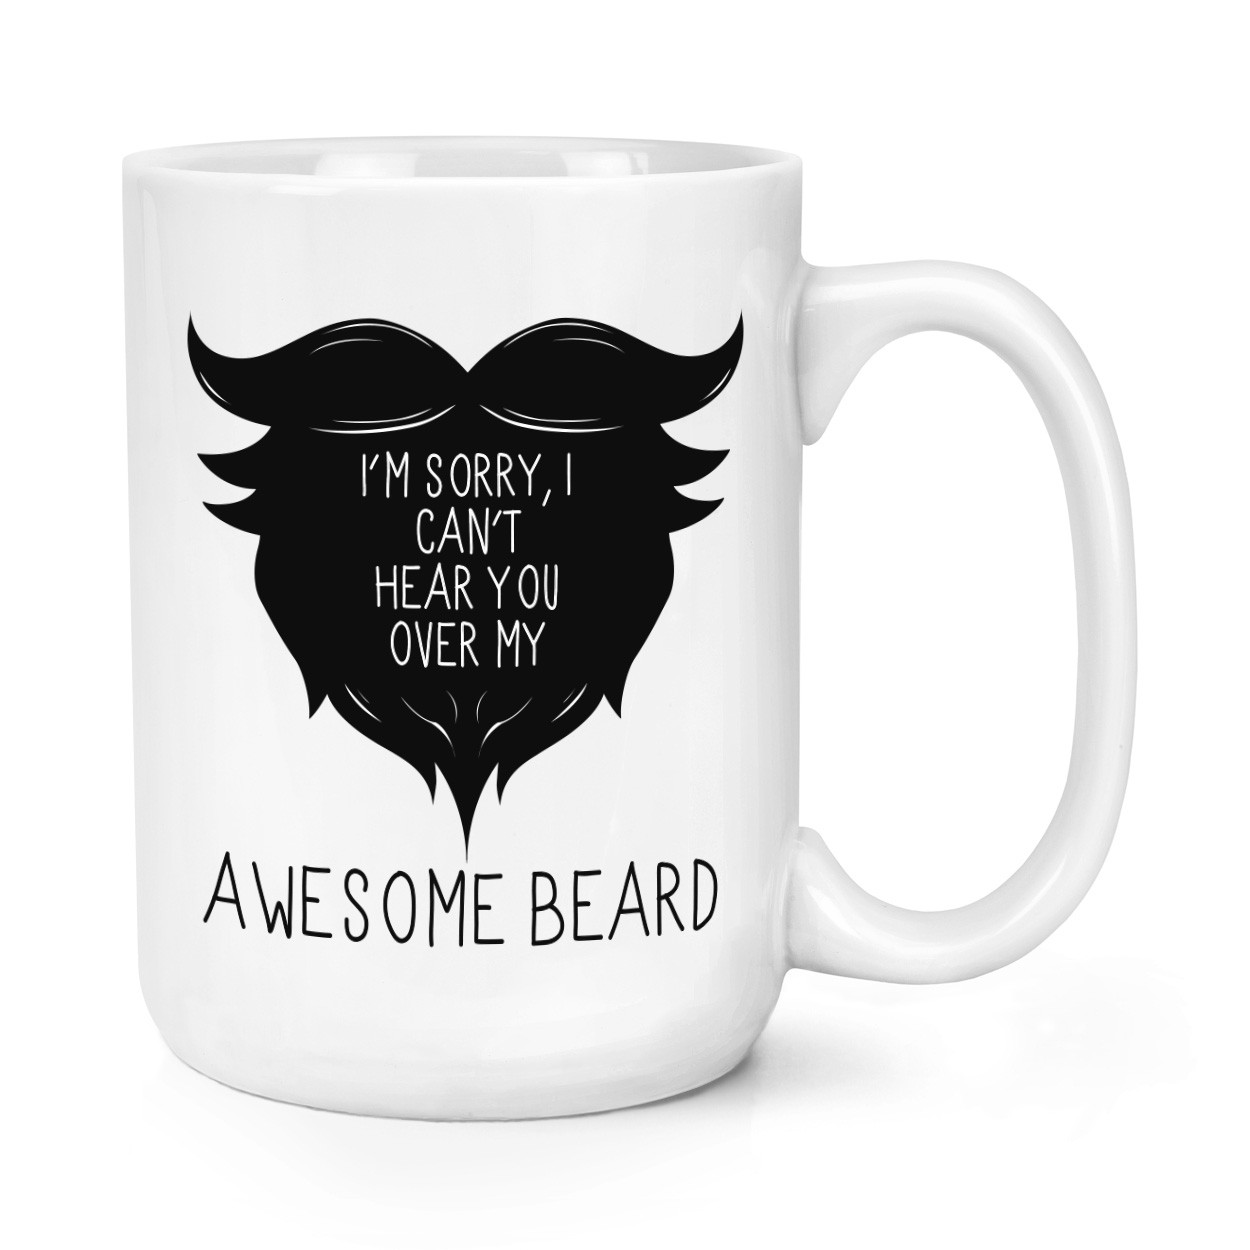 I Can't Hear You Over My Awesome Beard 15oz Large Mug Cup